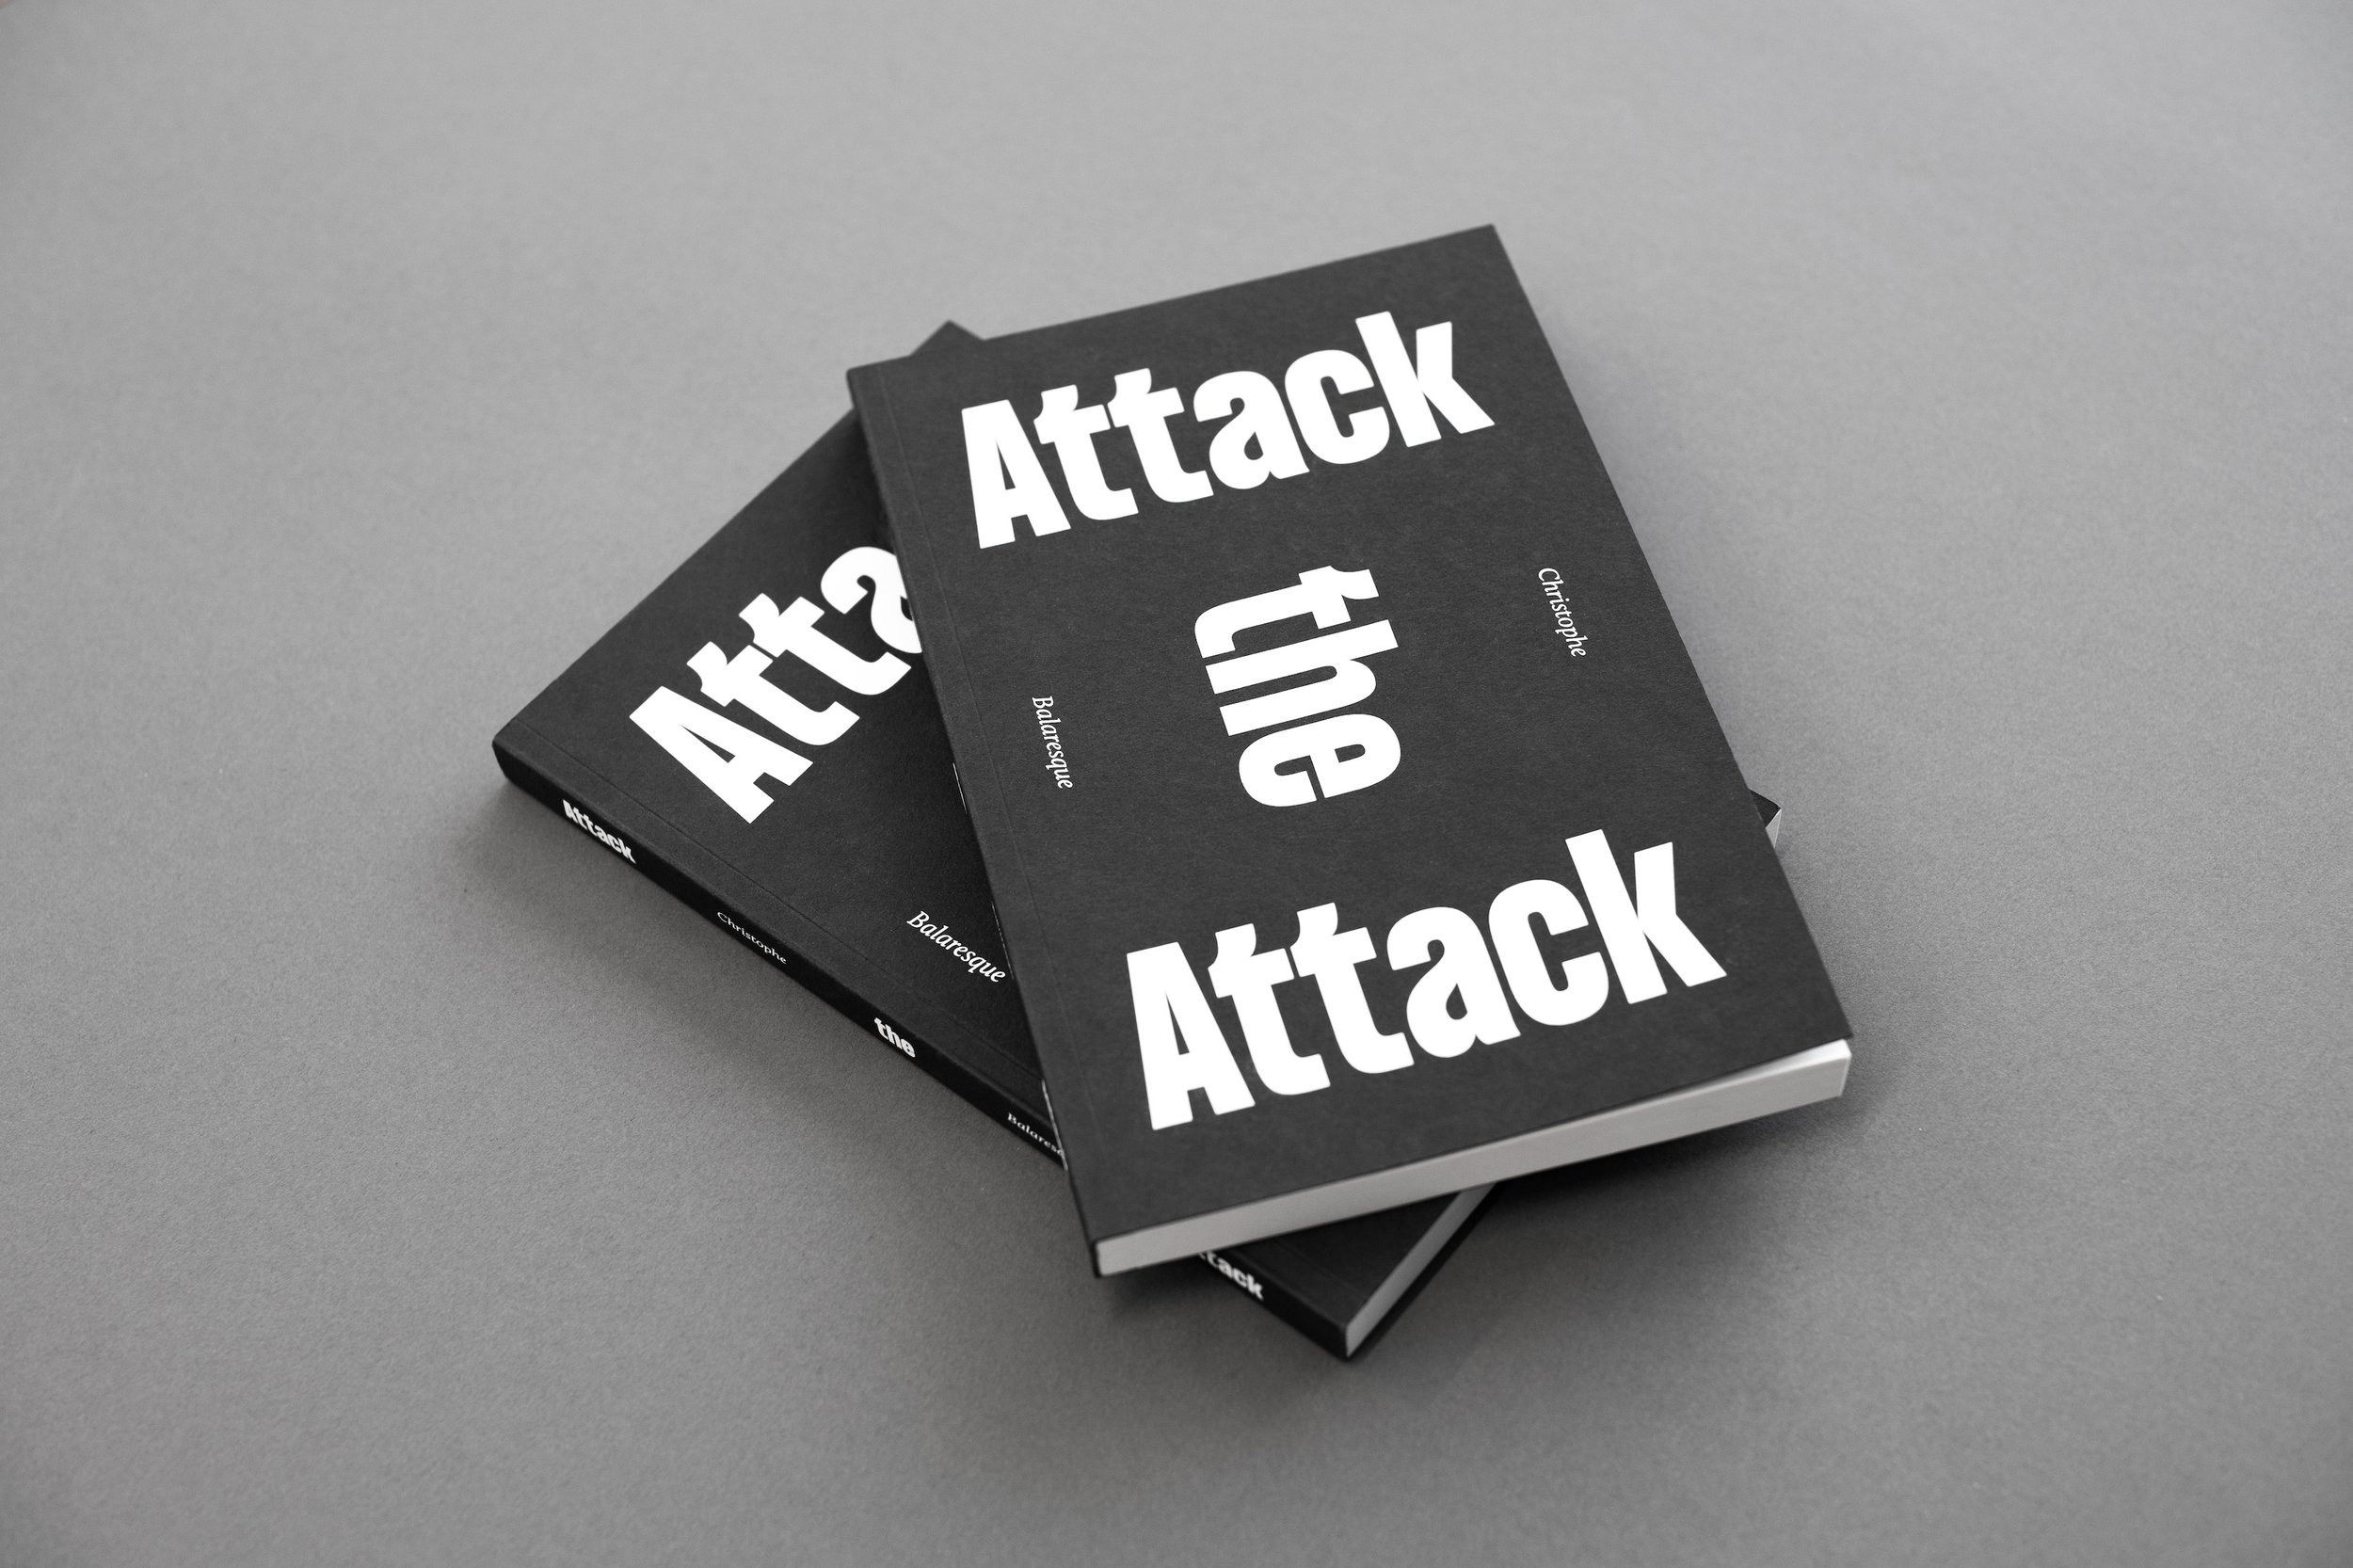 Written by christophe balaresque, Attack the Attack